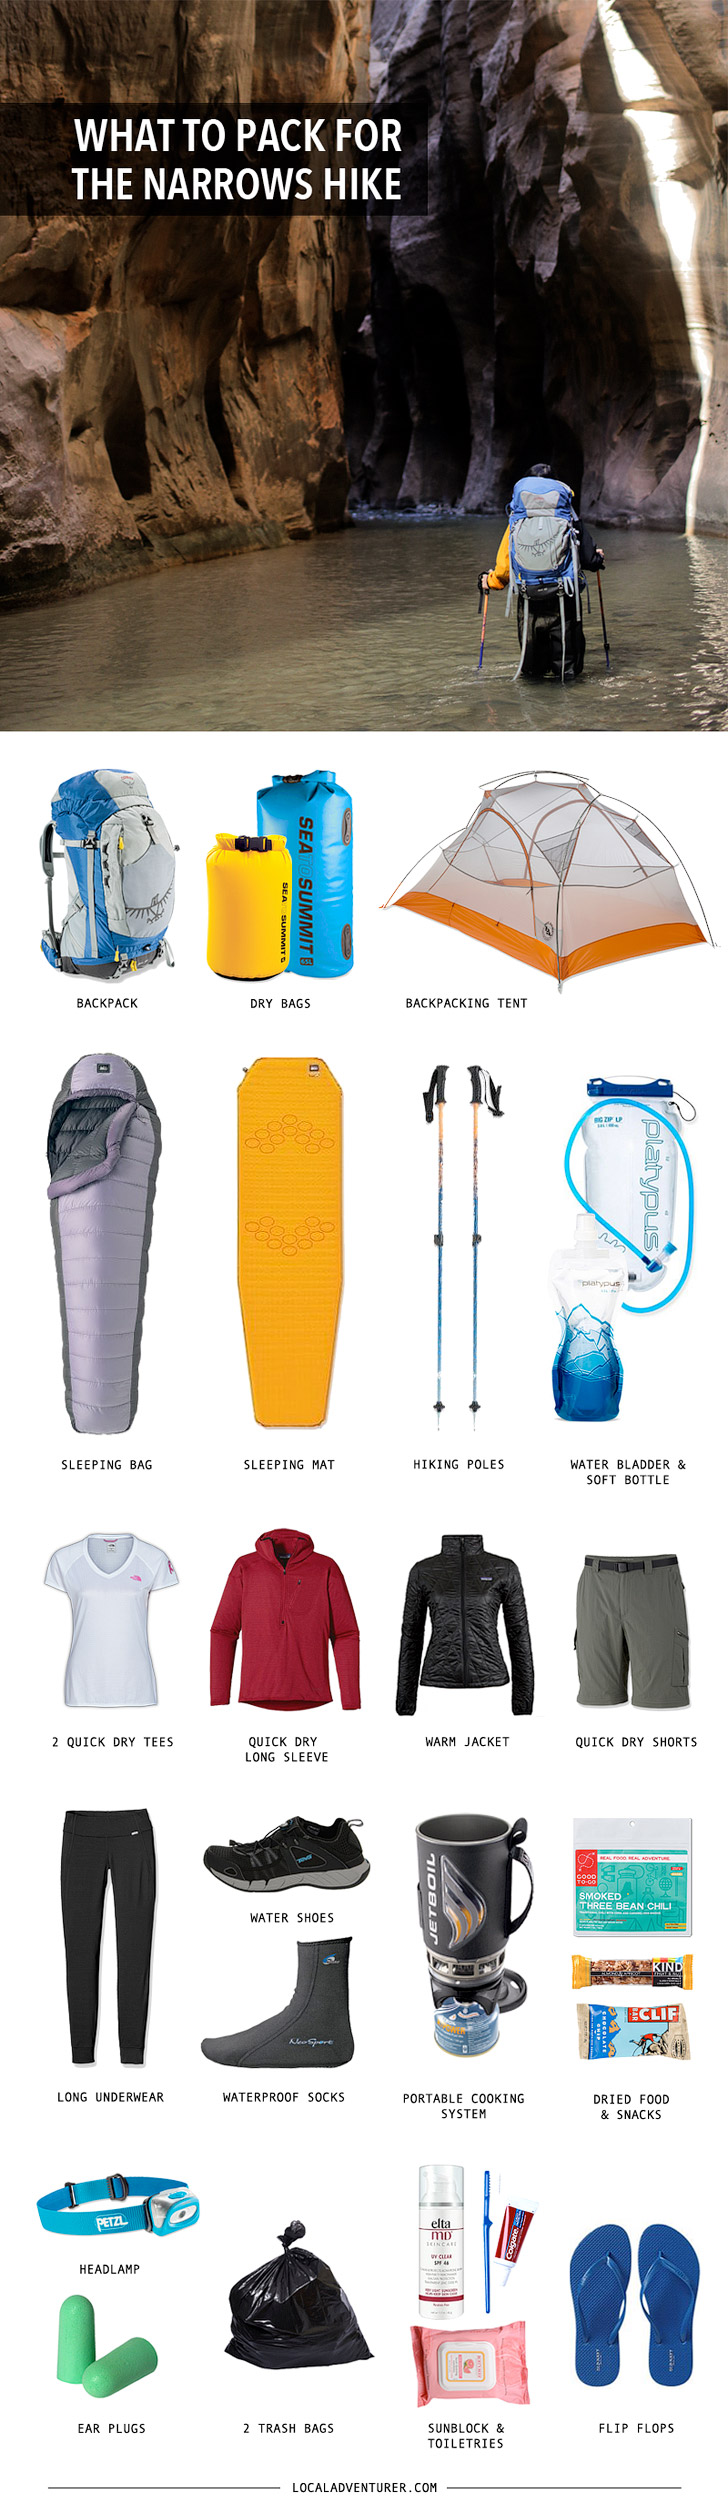 Backpacking Gear List for the Zion Narrows Hike Top Down.